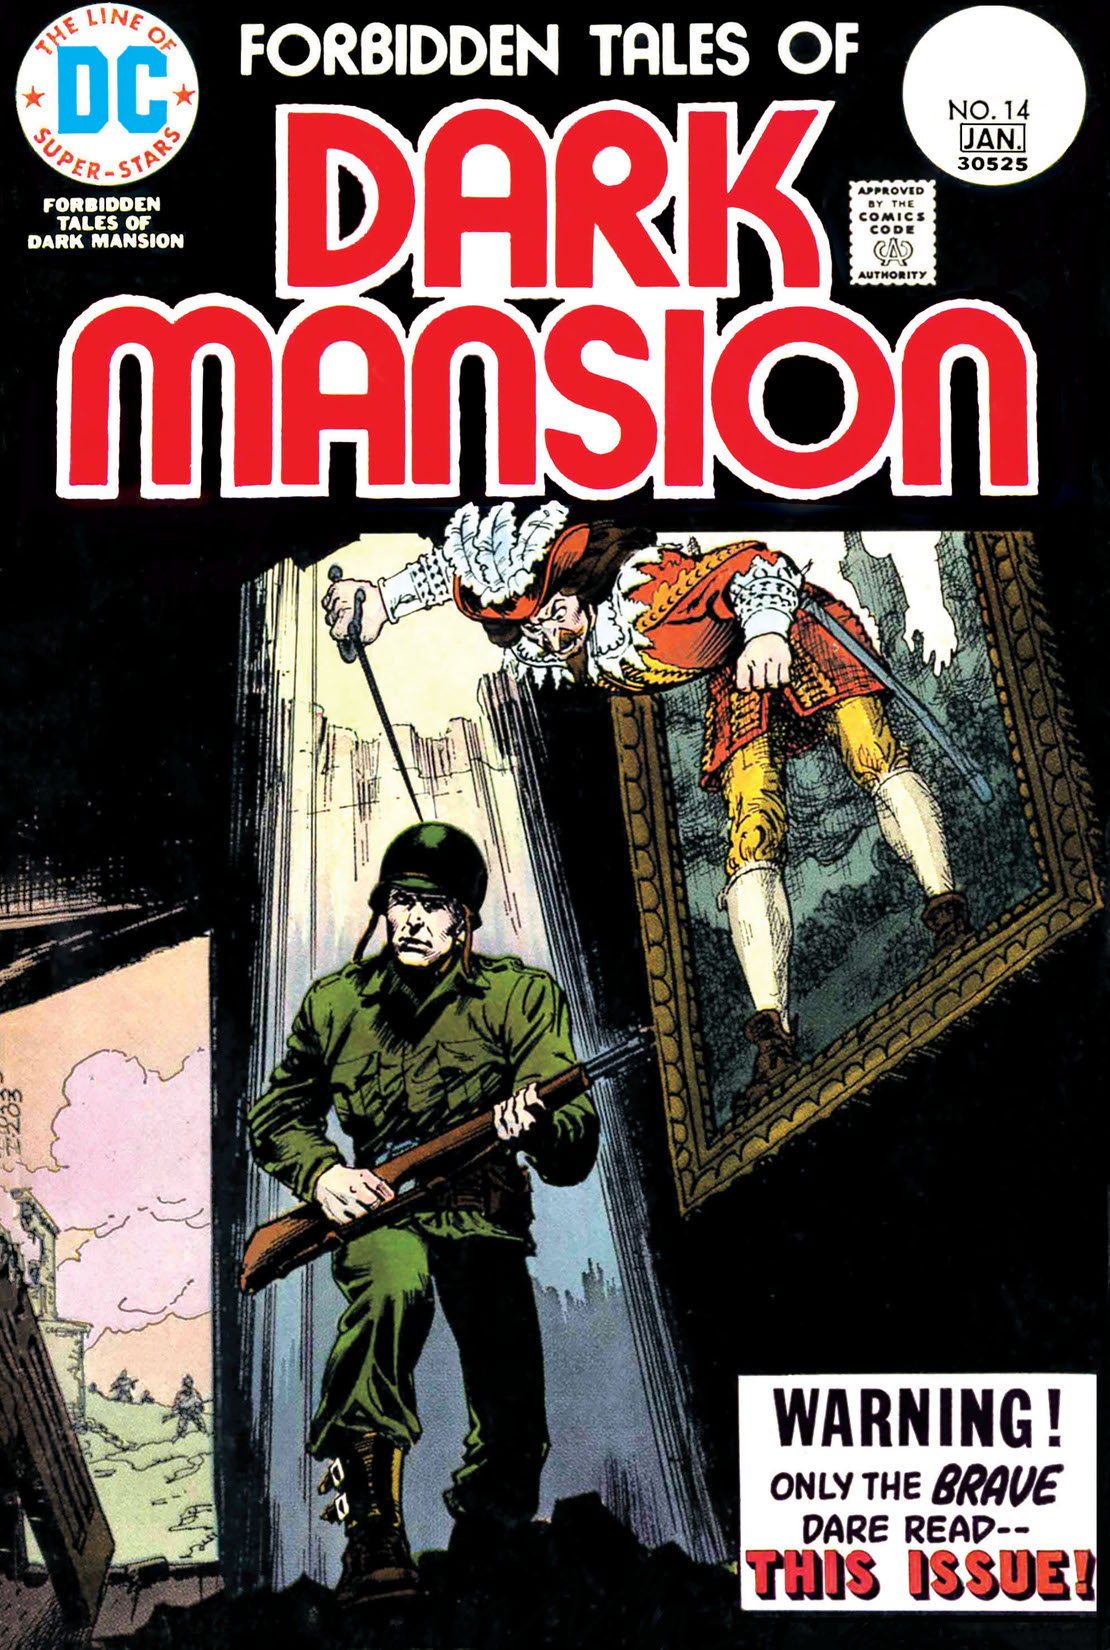 Forbidden Tales of Dark Mansion #14 preview images